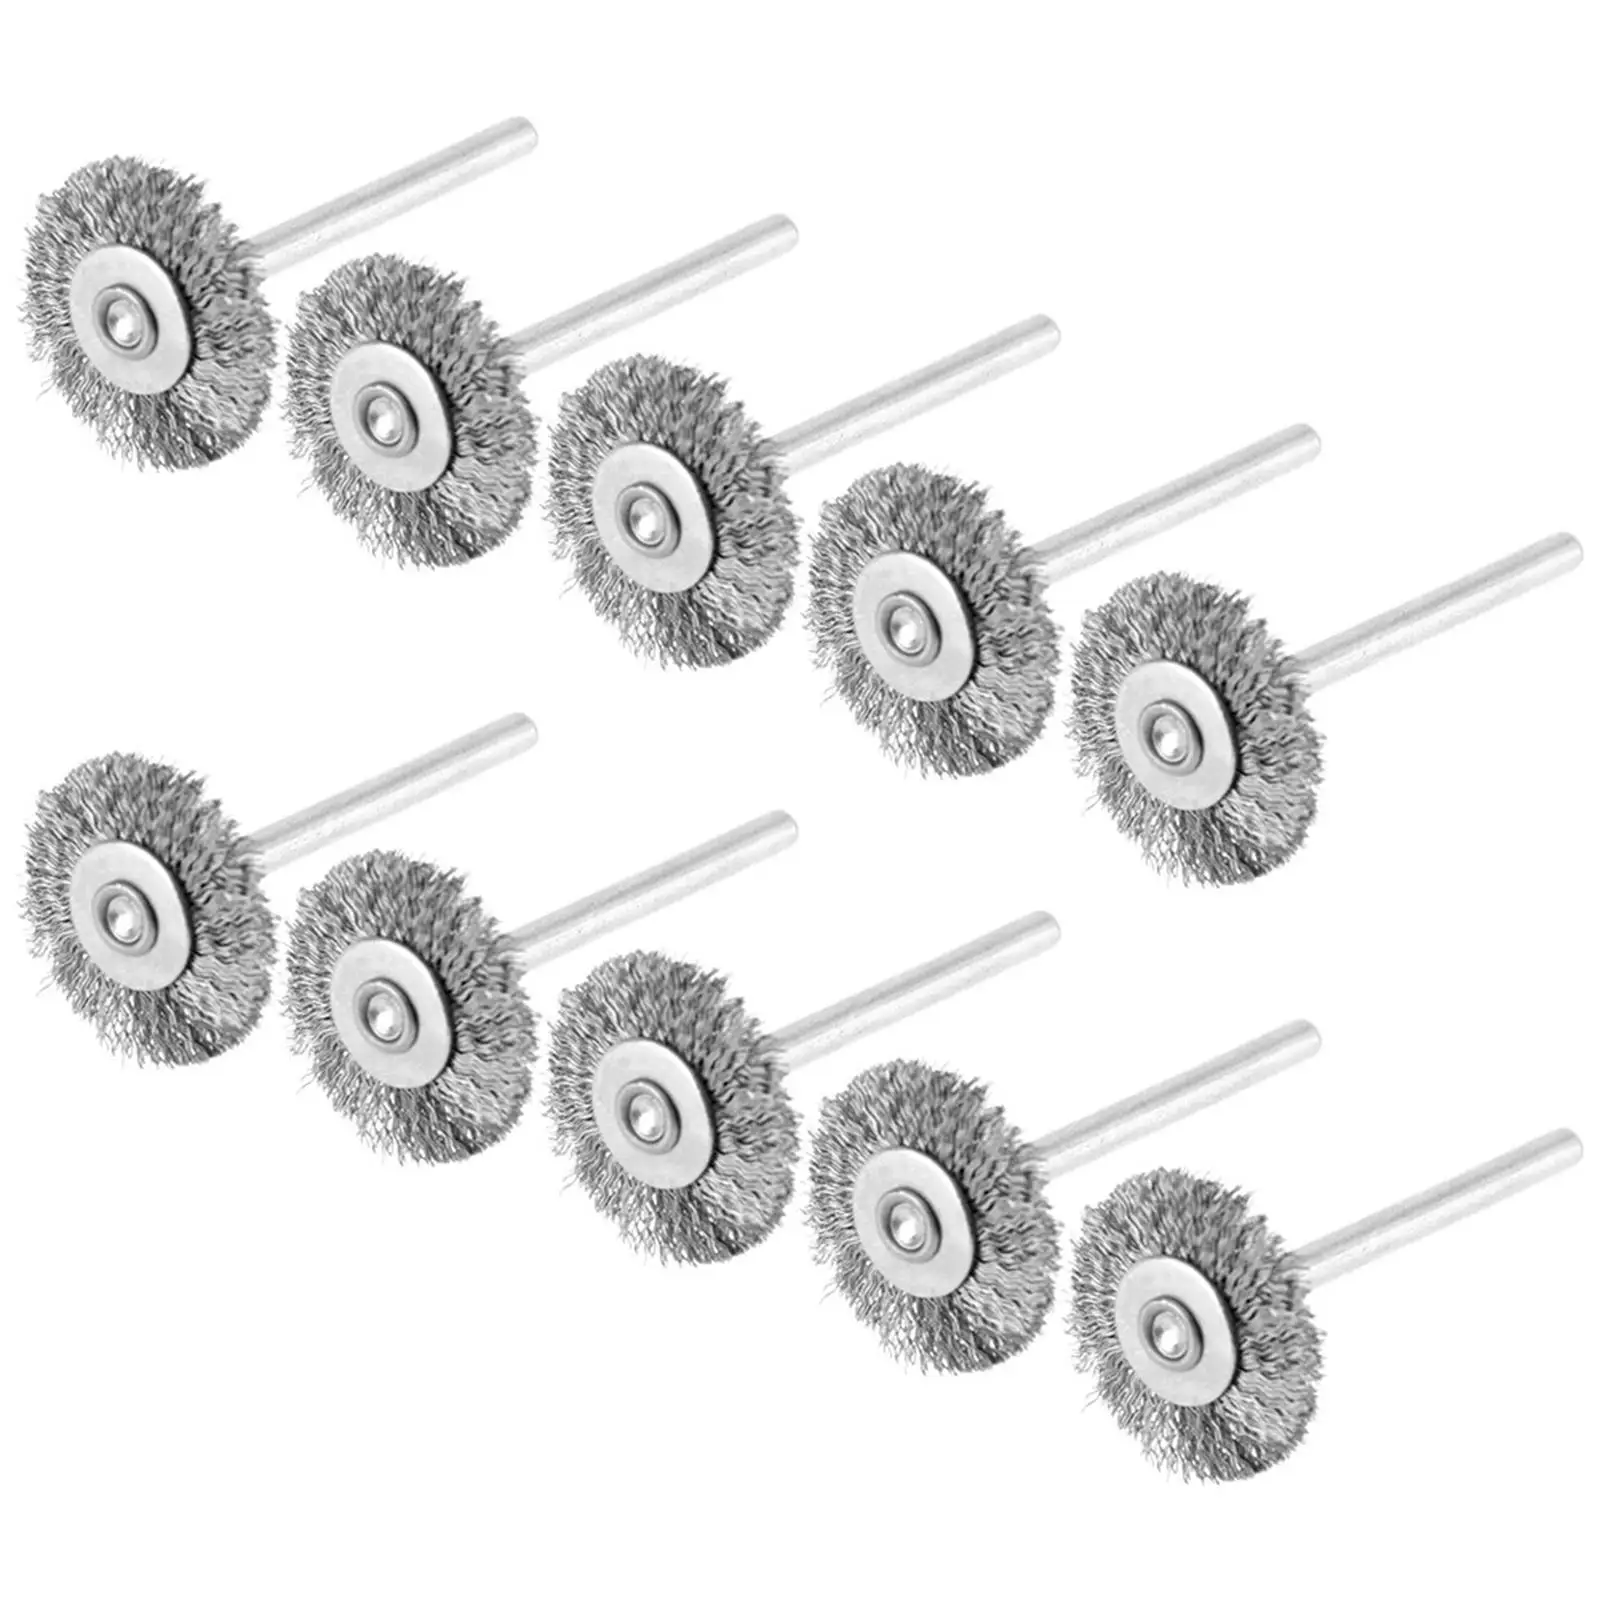 10x 2.2cm Steel wire Brush for Drill Steel Bristle Angle Grinder Surface Polishing Replacement Accessory